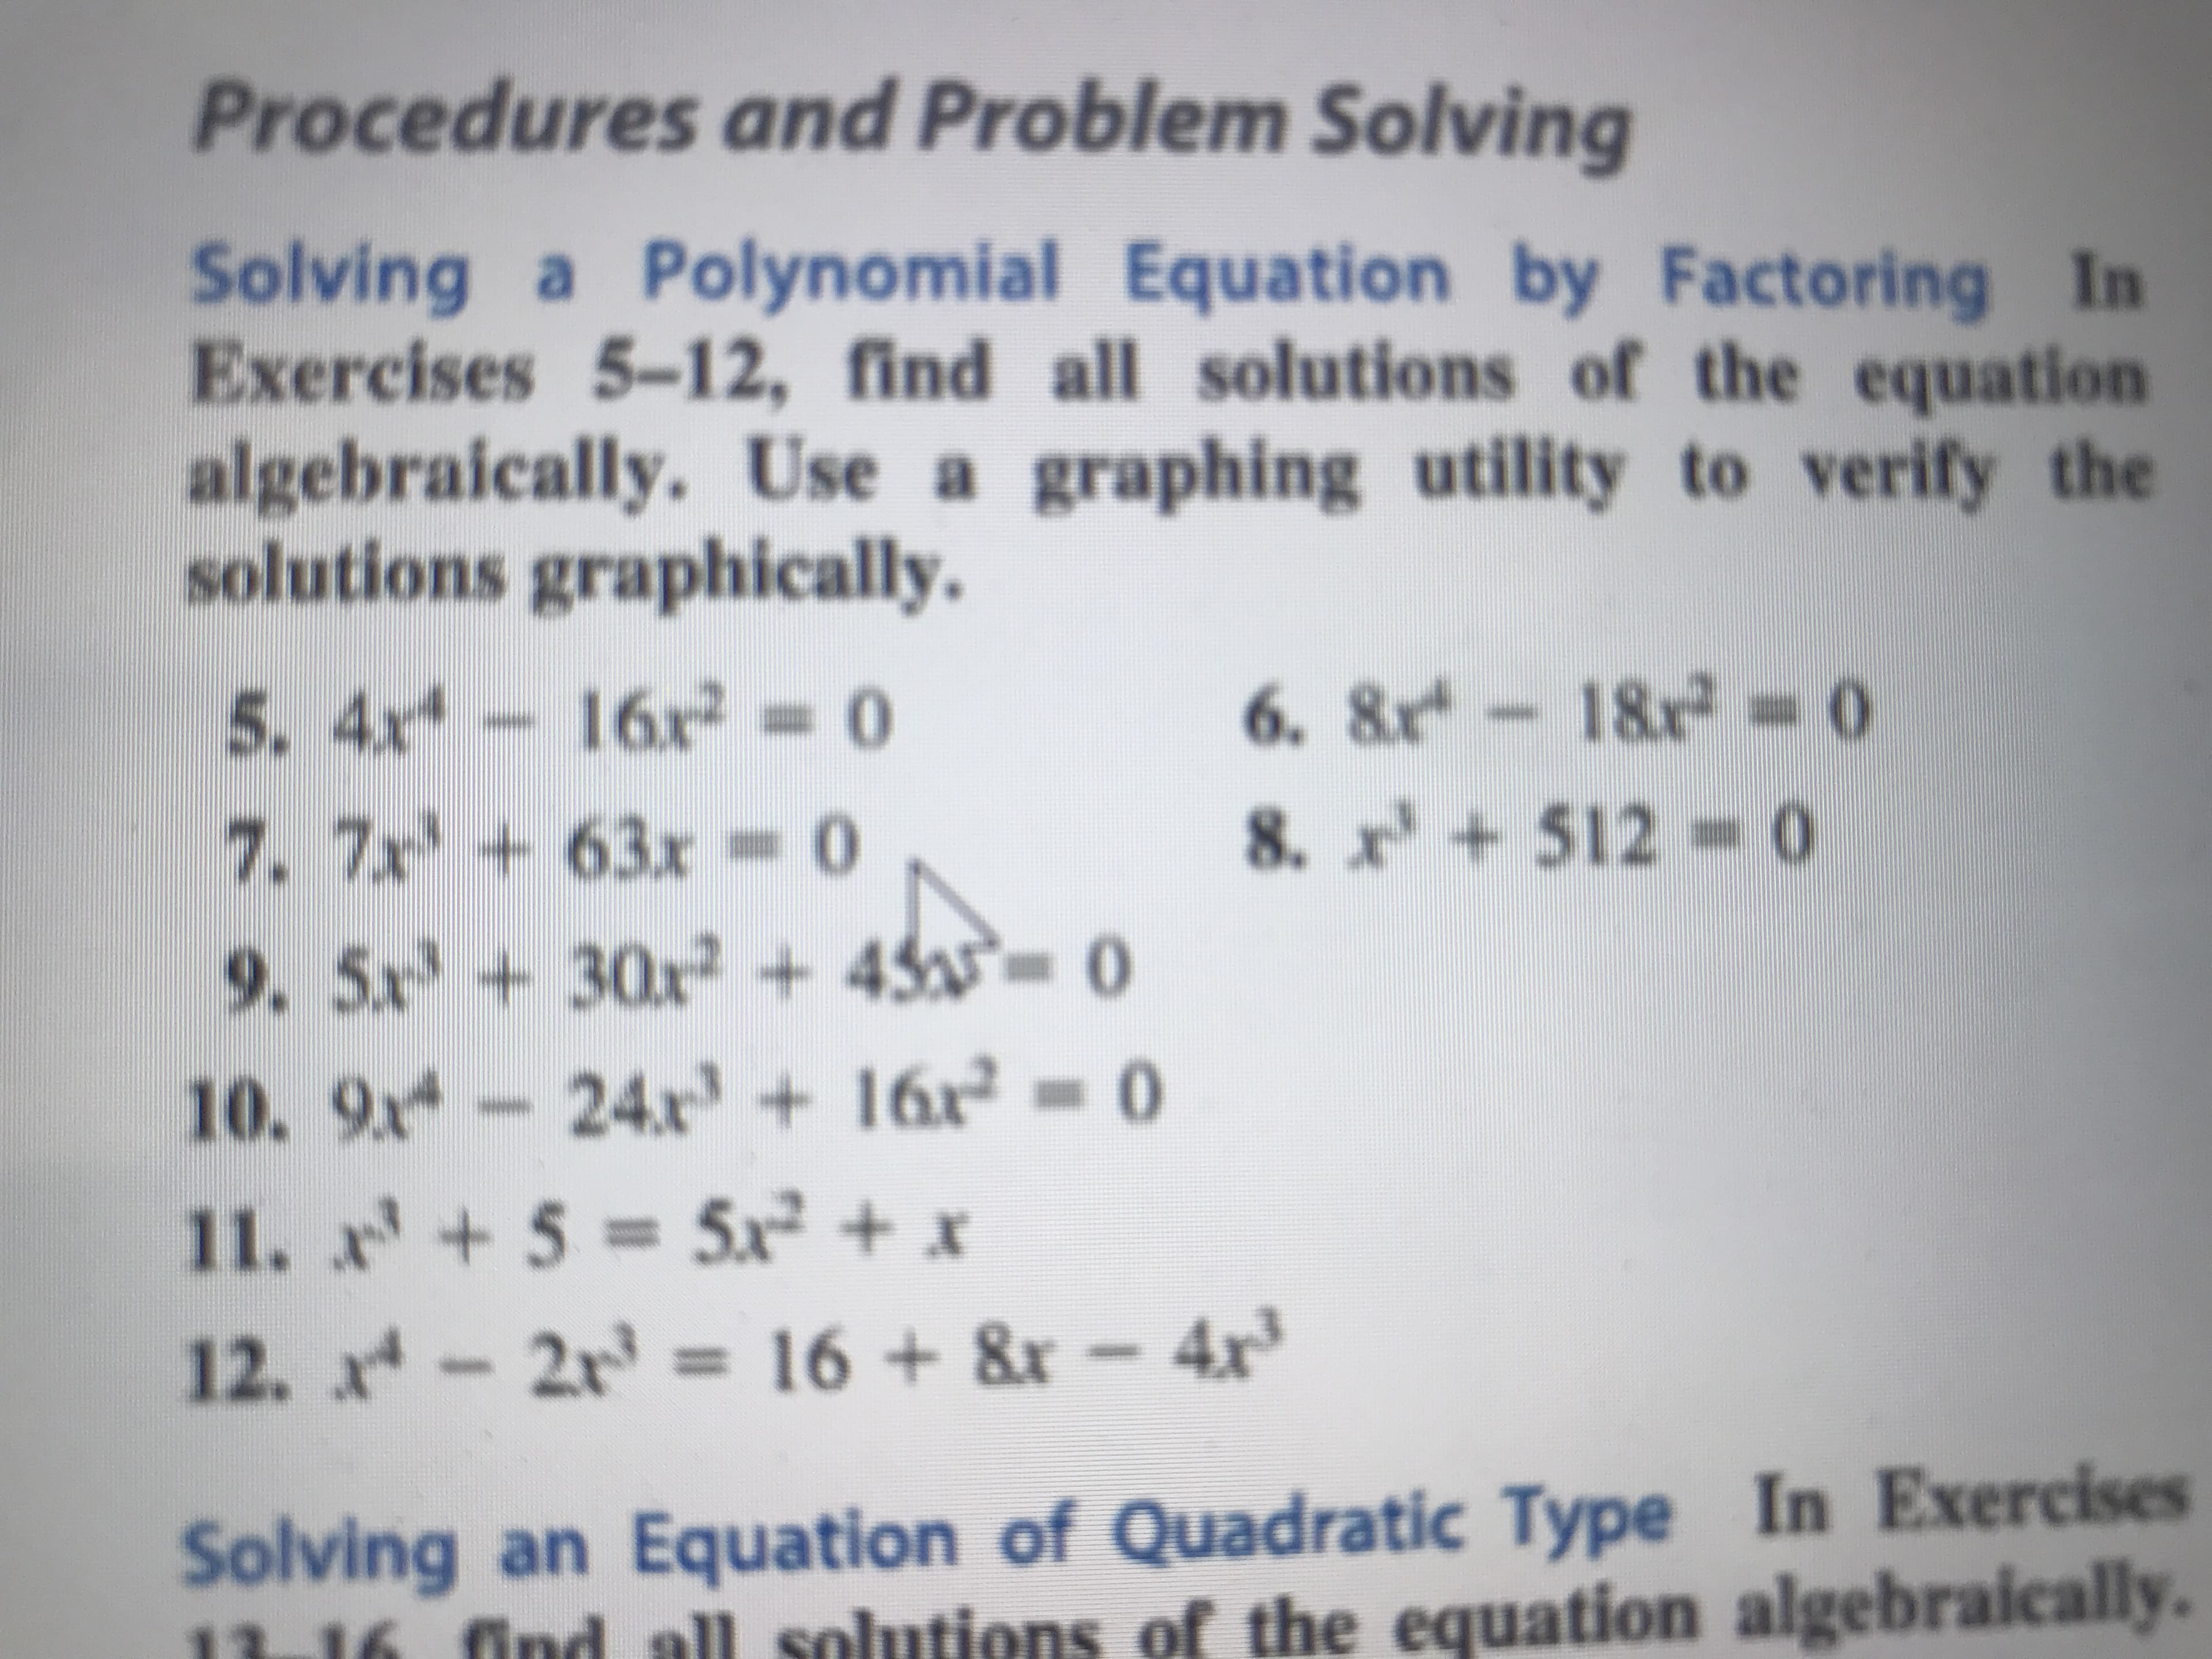 Procedures and Problem Solving
Solving a Polynomial Equation by Factoring In
Exercises 5-12, find all solutions of the equation
algebraically. Use a graphing utility to verify the
solutions graphically.
11. 5-5x2+
Solving an Equation of Quadratic Type In Exercises
13-16 find all solutions of
the equation algebraically
